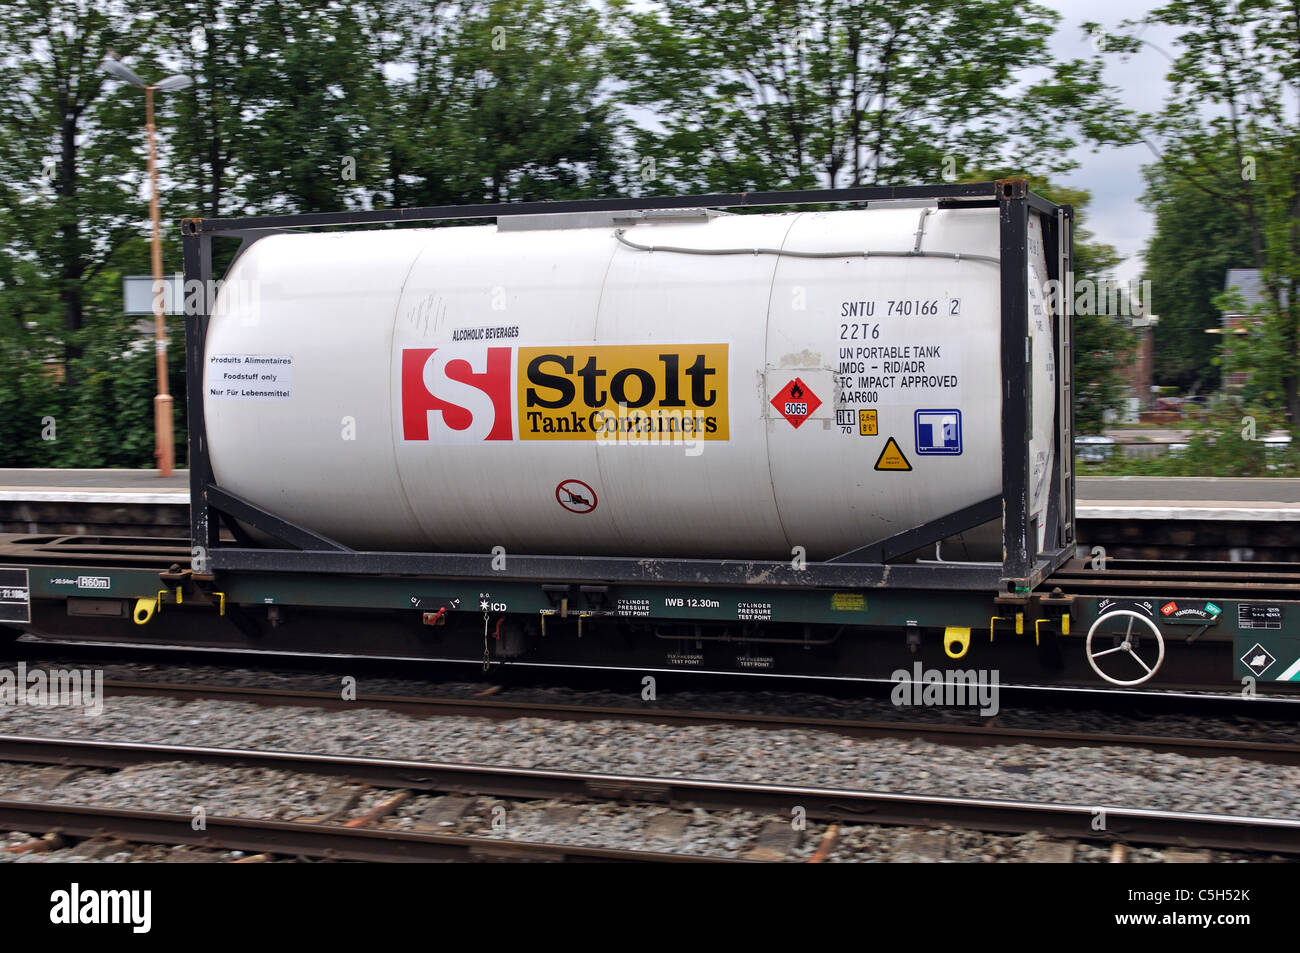 Stolt tank container on a train, UK Stock Photo